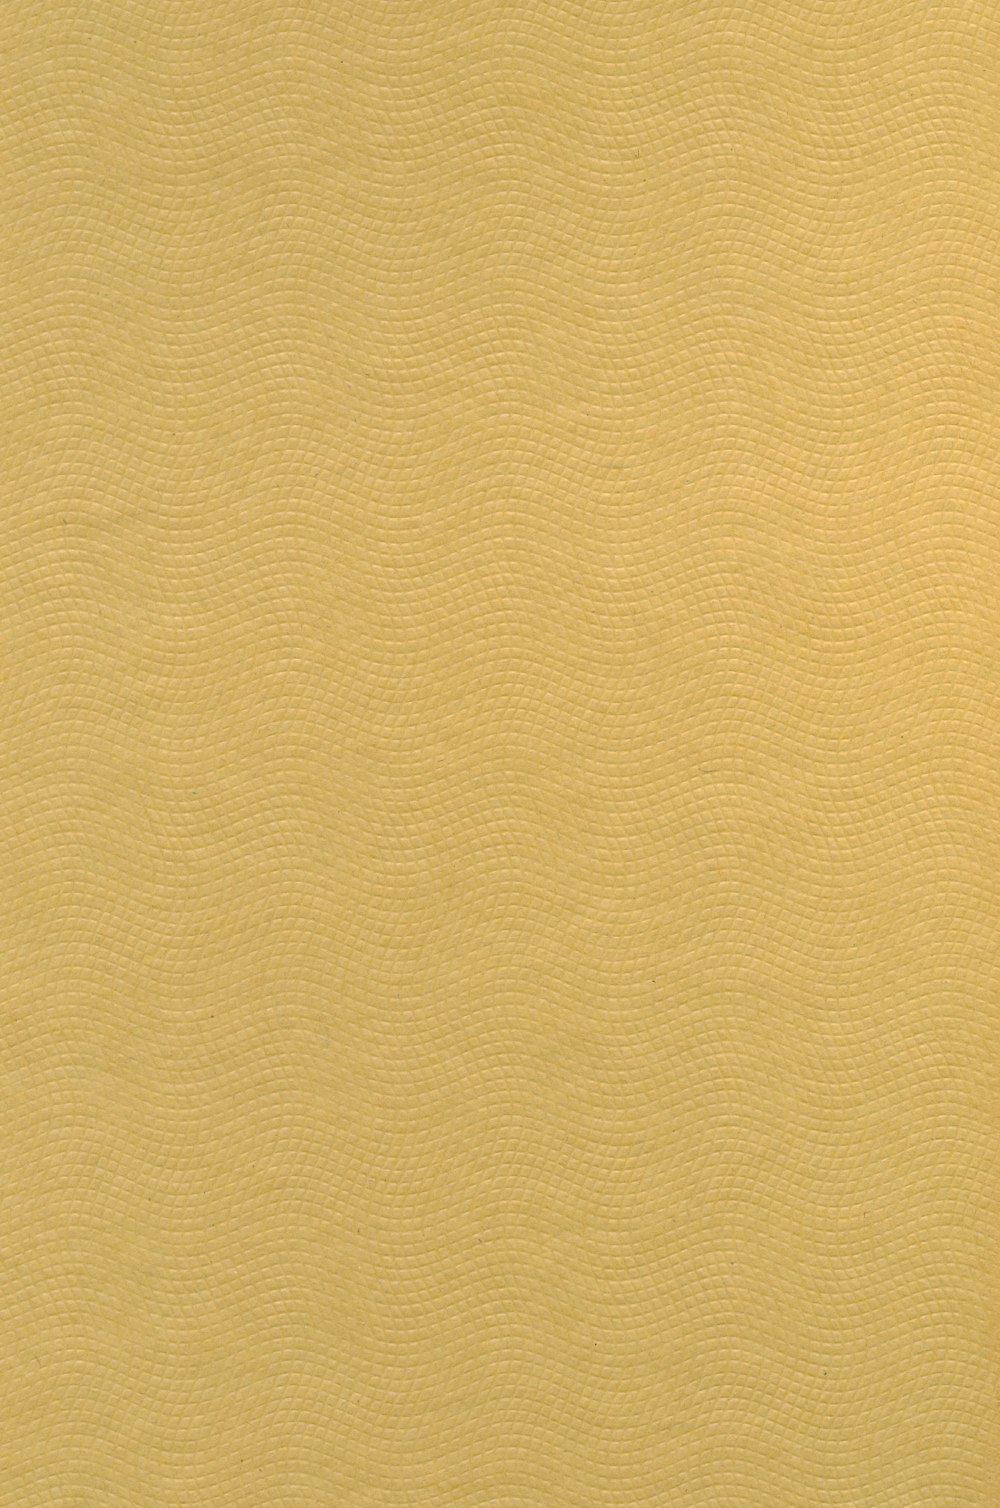 a close up of a yellow background with a black border